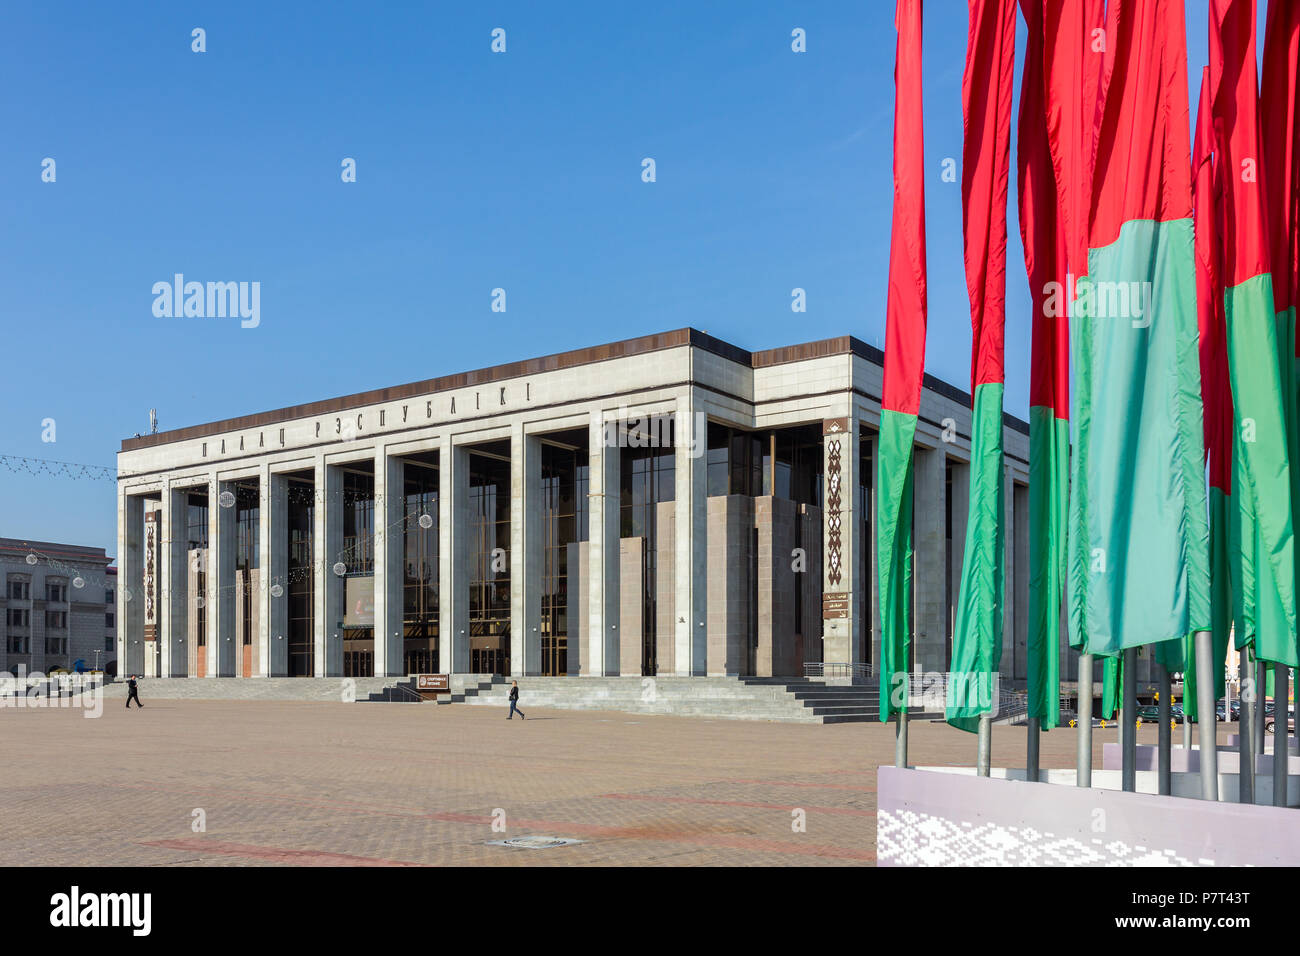 Minsk, Belarus - September 27, 2017: Palace of the Republic with flags in national colors on October Square in Minsk city center Stock Photo